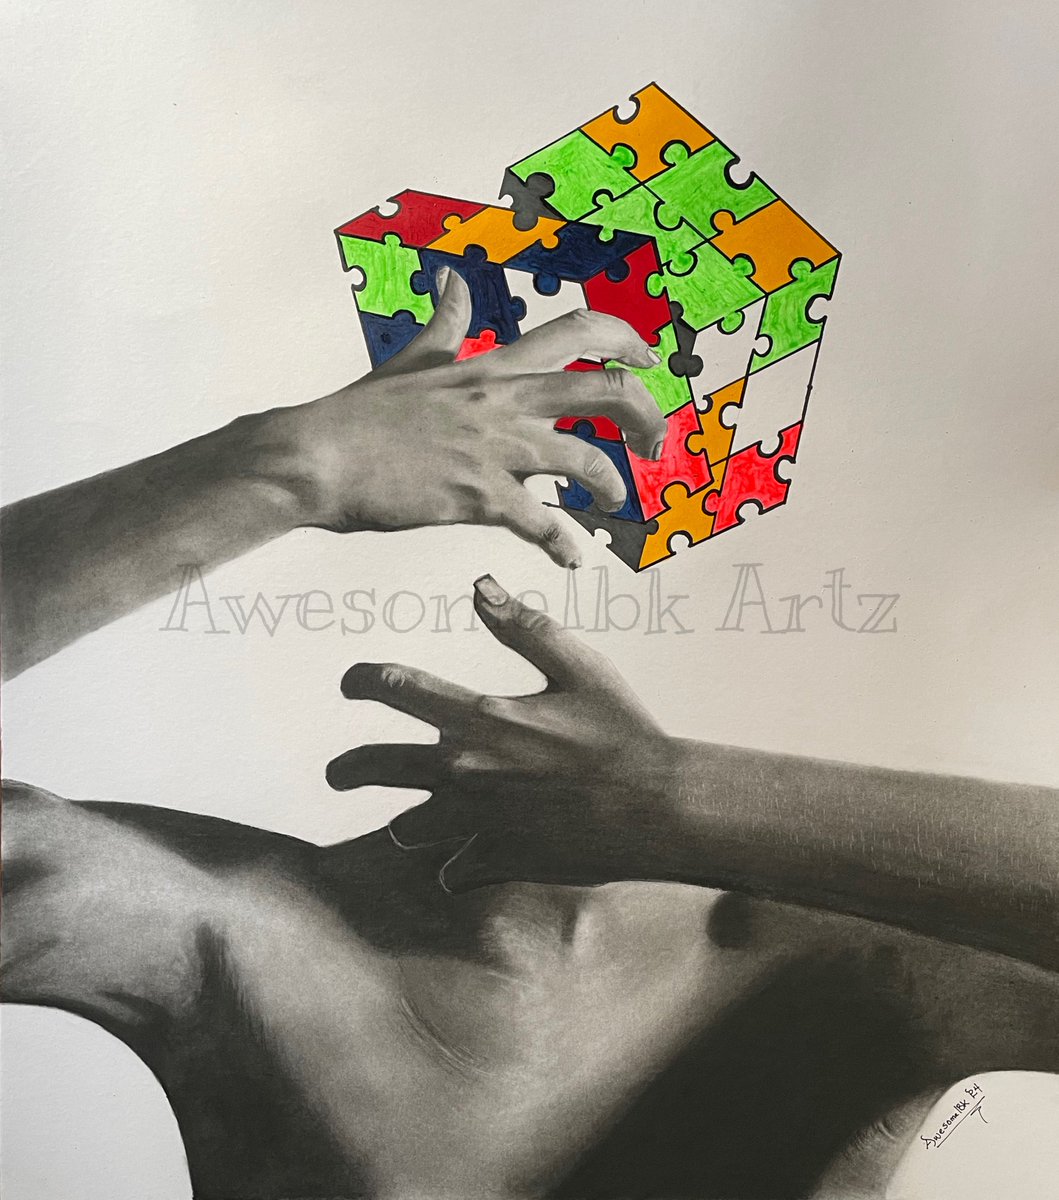 THE RUBIK’S CUBE How do you understand and react to given situations in a split second? How do you manage to remain calm when your head in a chaos?? How do you solve it all?? Mystery Charcoal and acrylic on paper #awesomeibk_artz